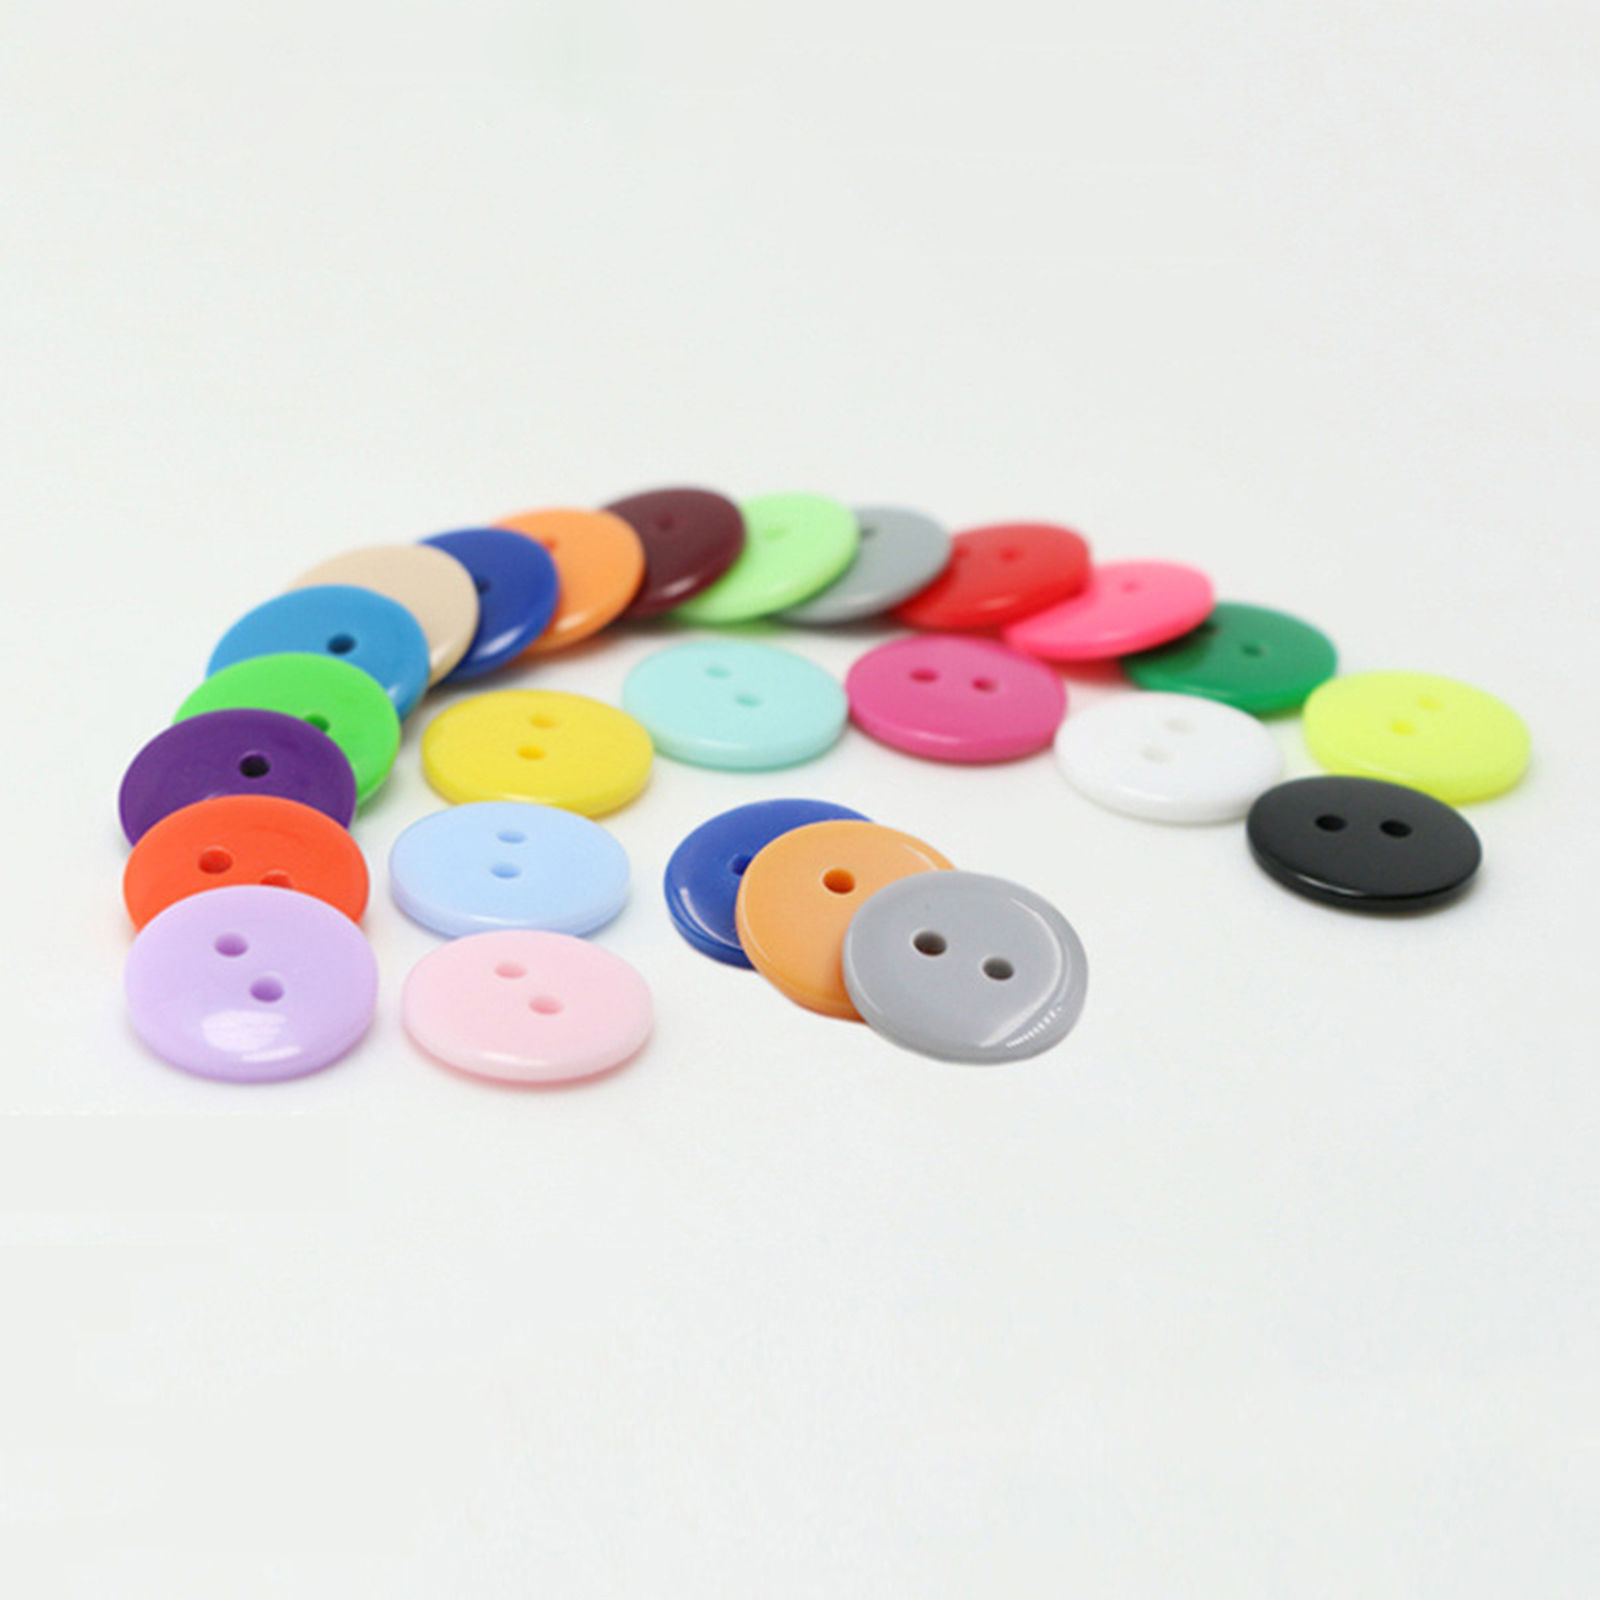 Immagine di 100pcs 20mm Resin 2 Hole Sewing Button Scrapbooking Embellishment Decorative Button Apparel Sewing Accessories